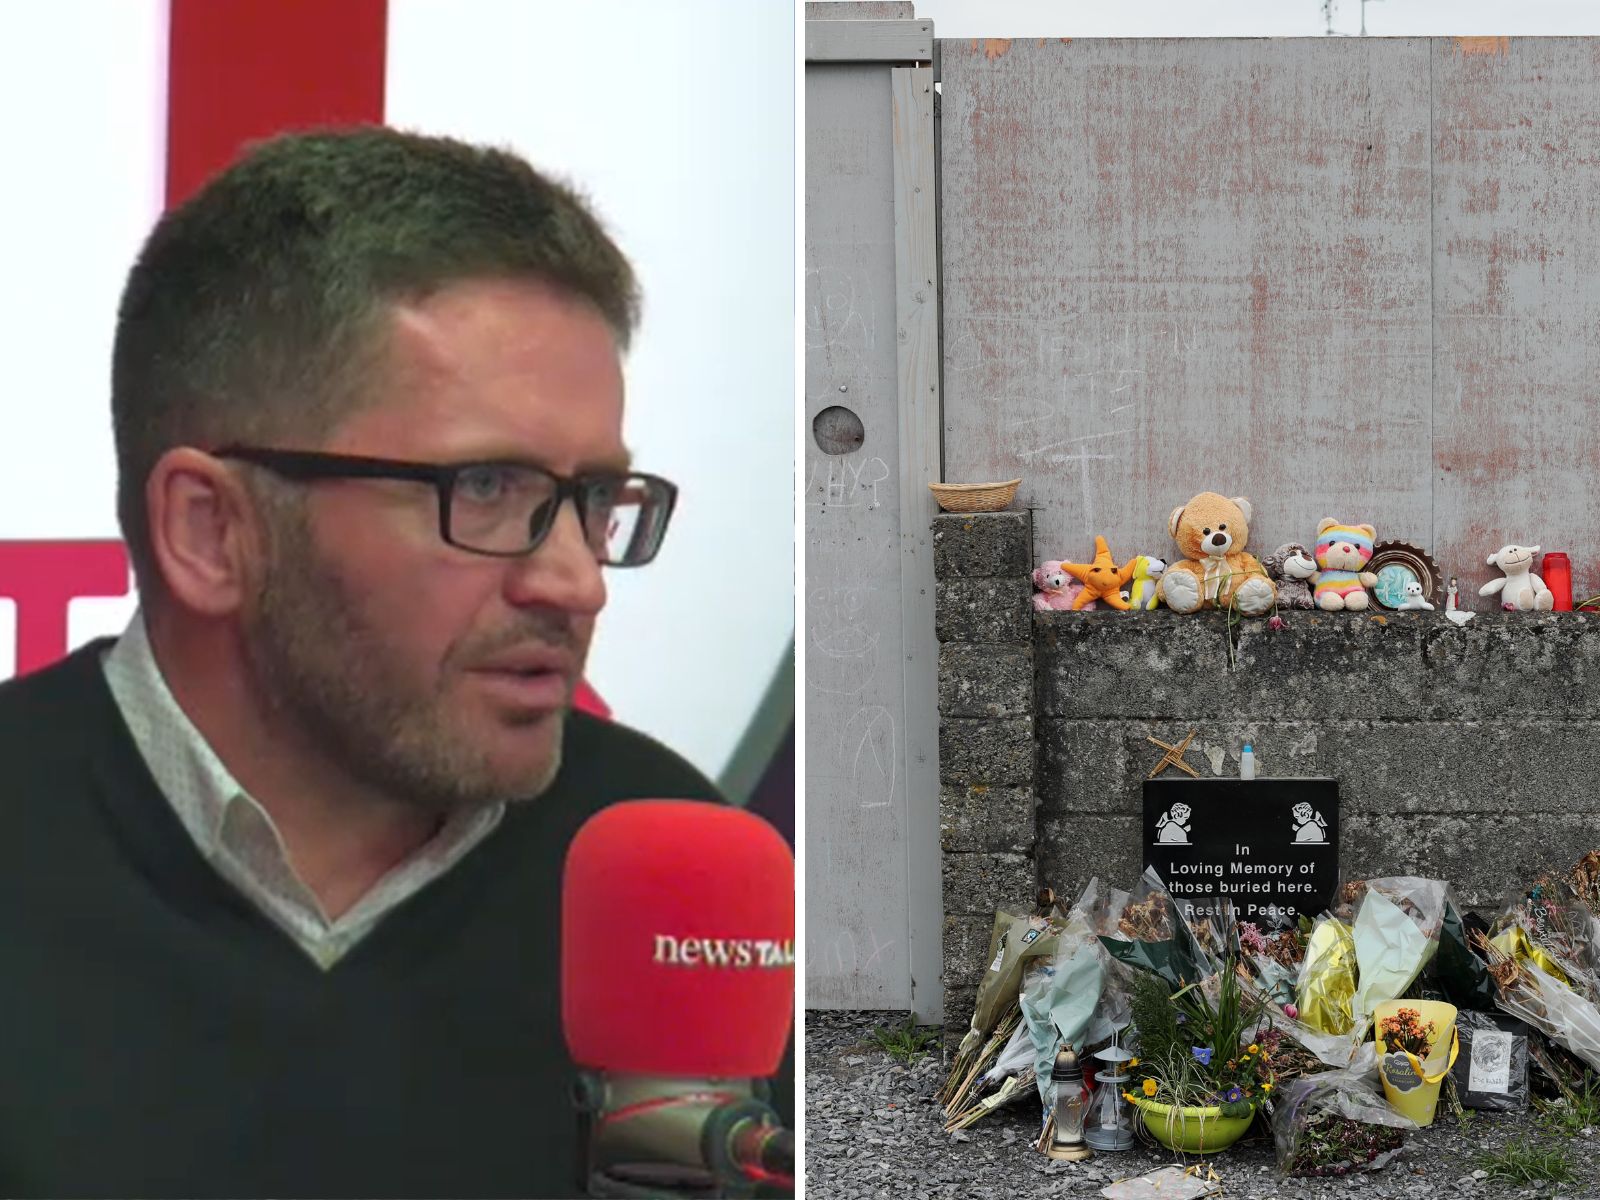 Split-screen image shows Daniel MacSweeney in Newstalk studios, and the site of the former Mother and Baby Home in Tuam, Co Galway